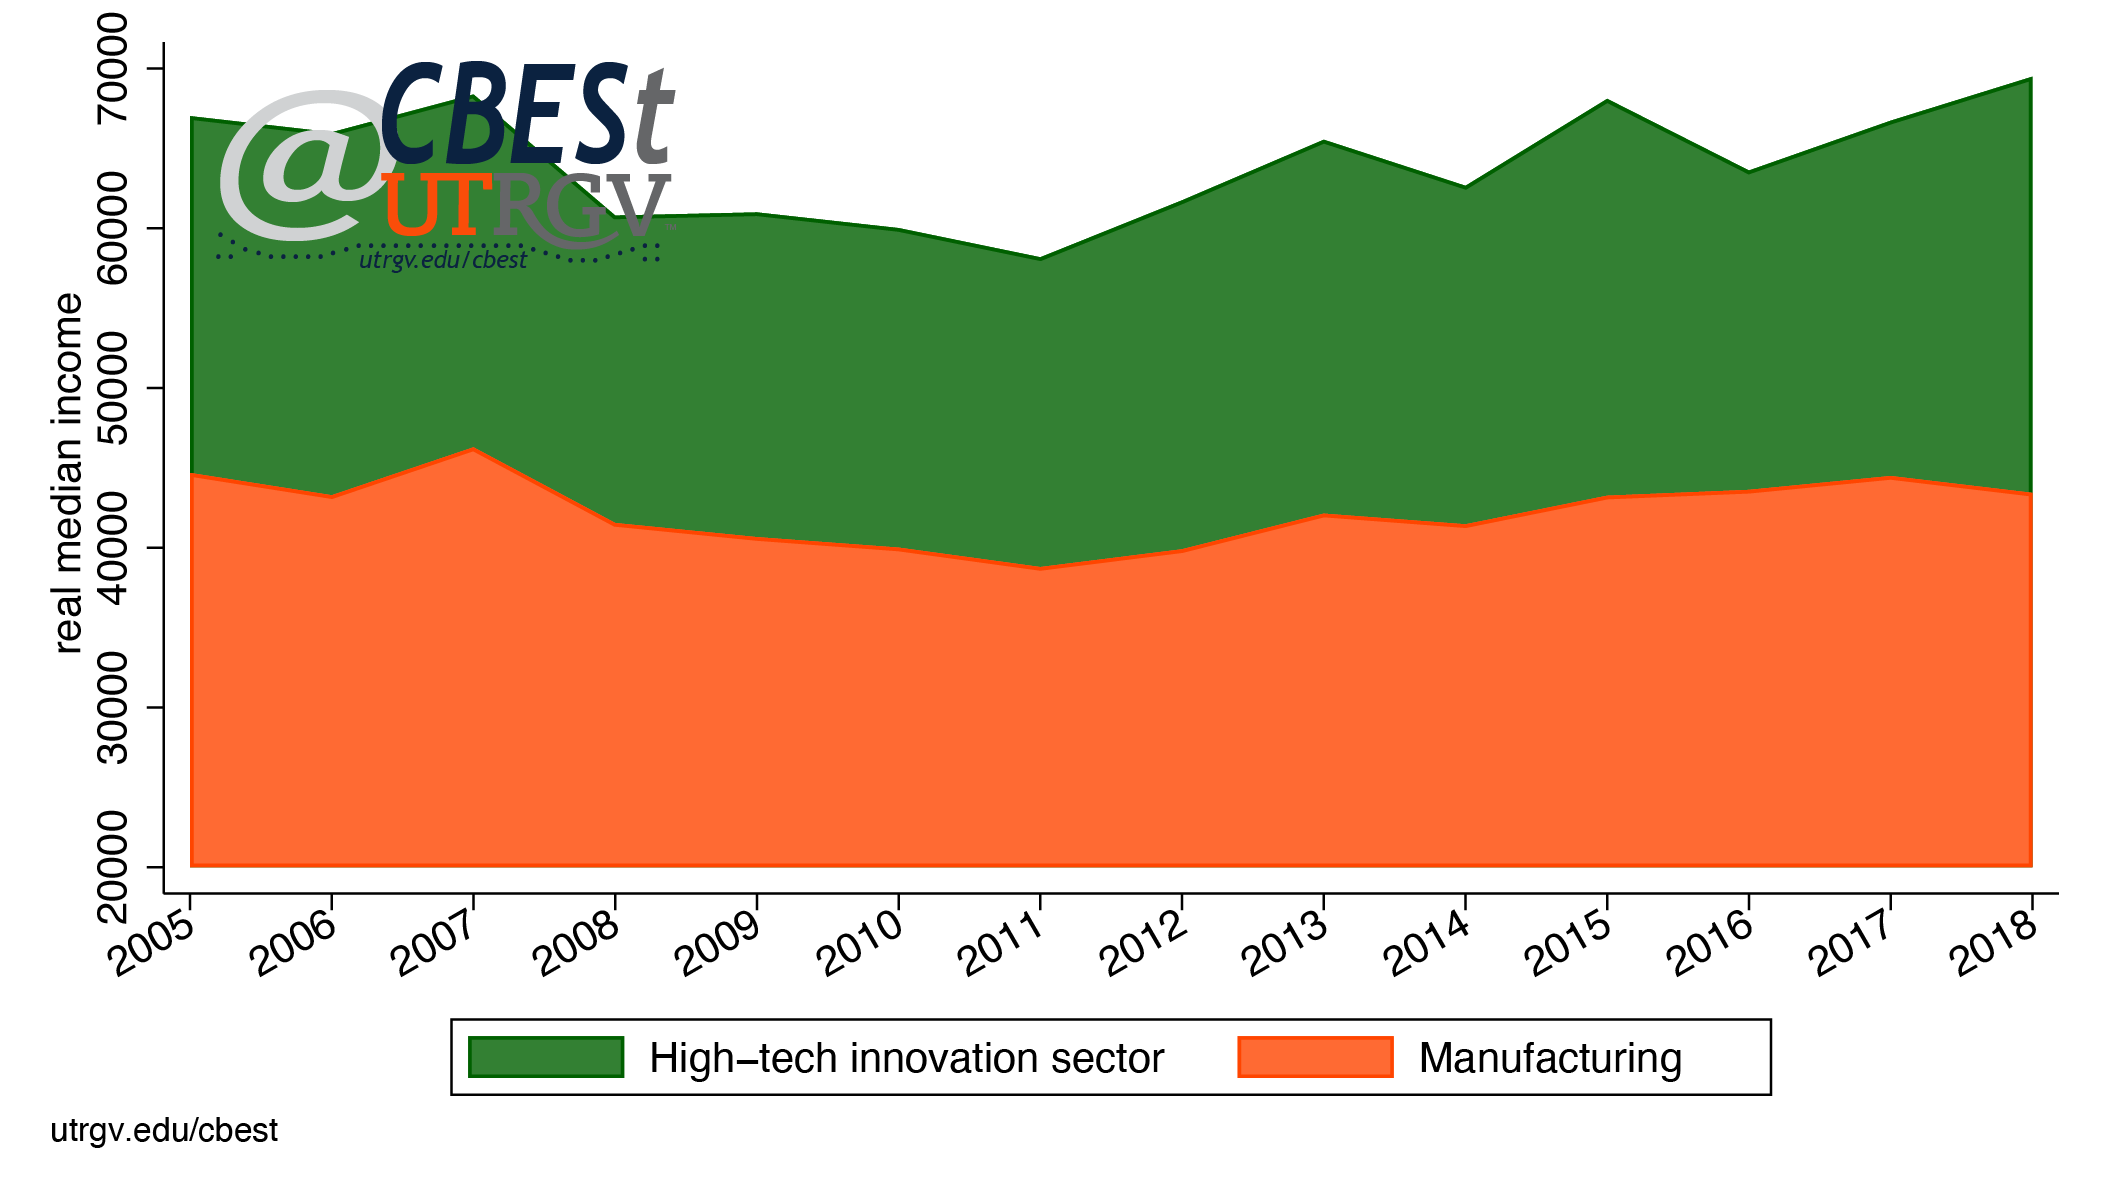 Real median income in high-tech innovation and manufacturing sector in Texas